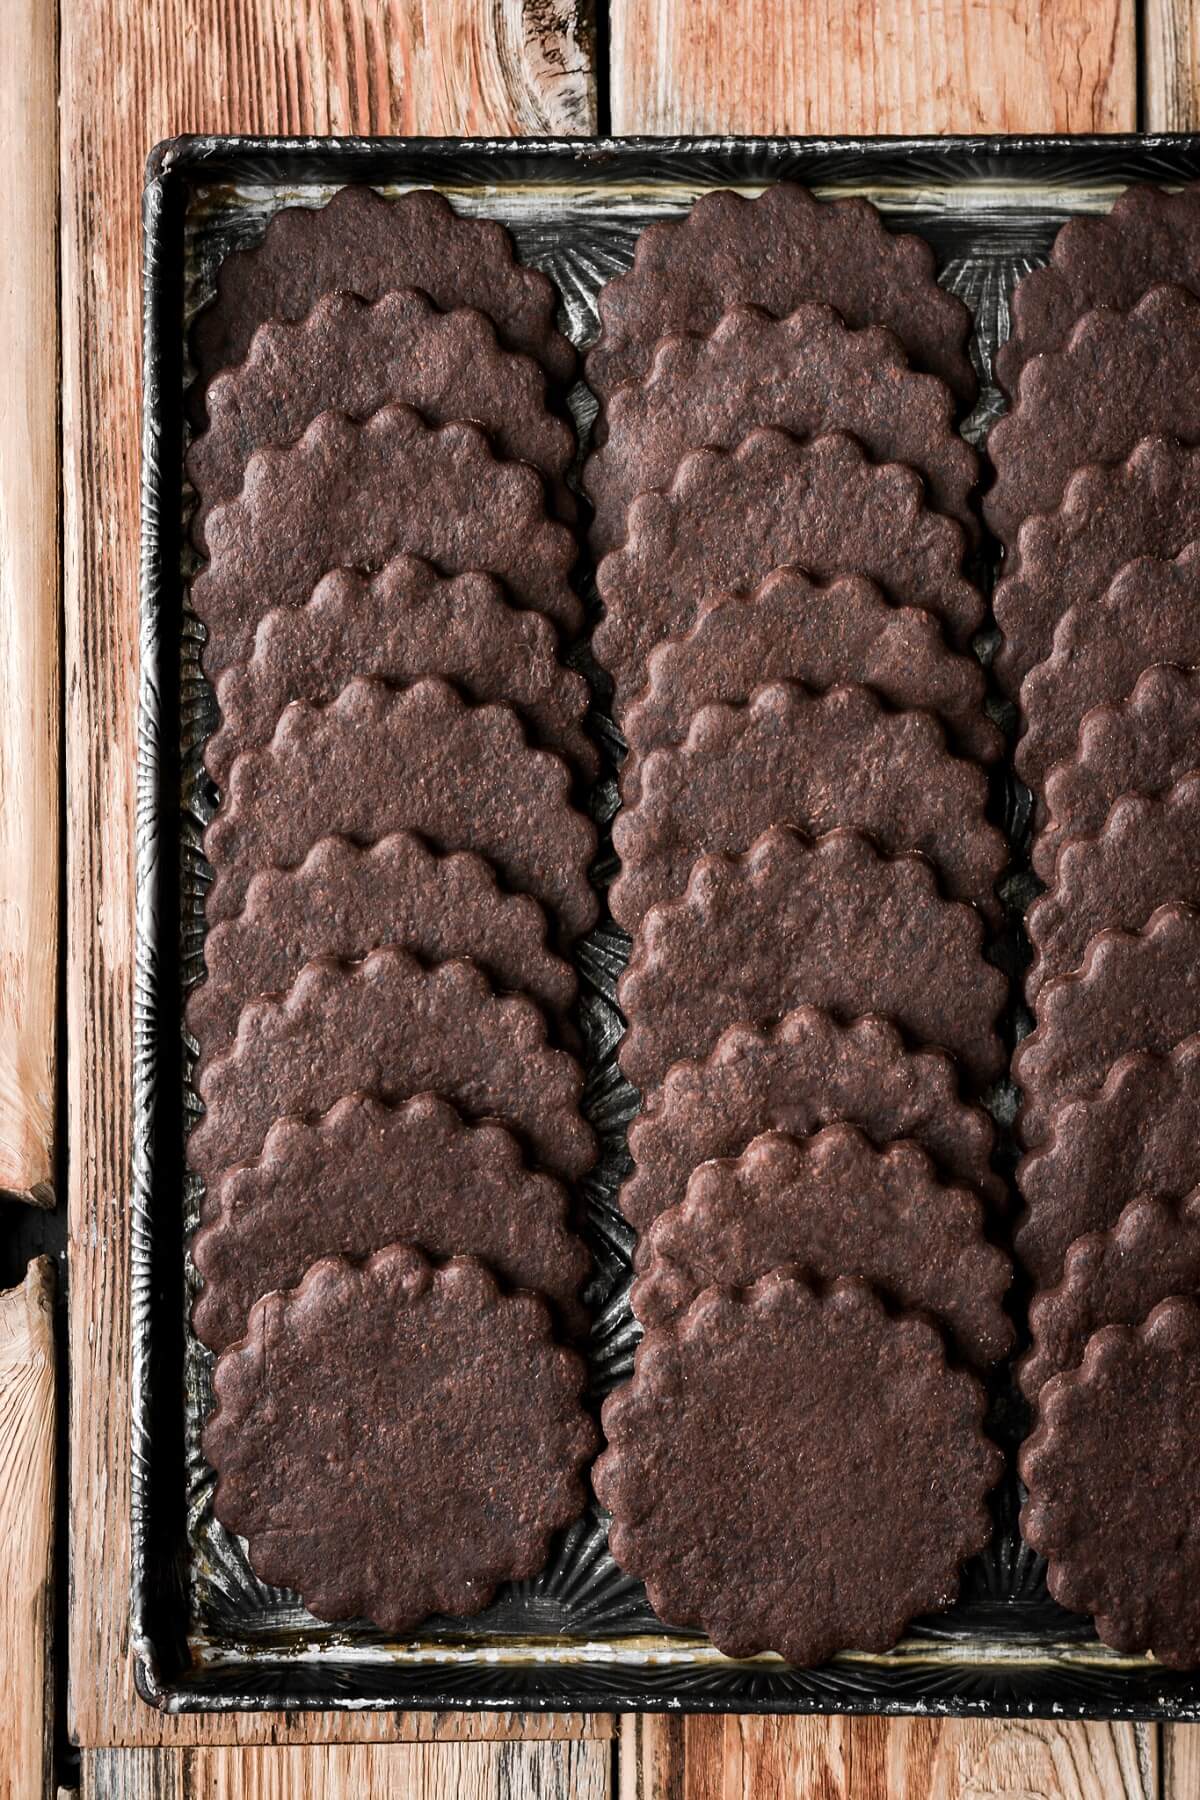 Chocolate sugar cookies with scalloped edges.